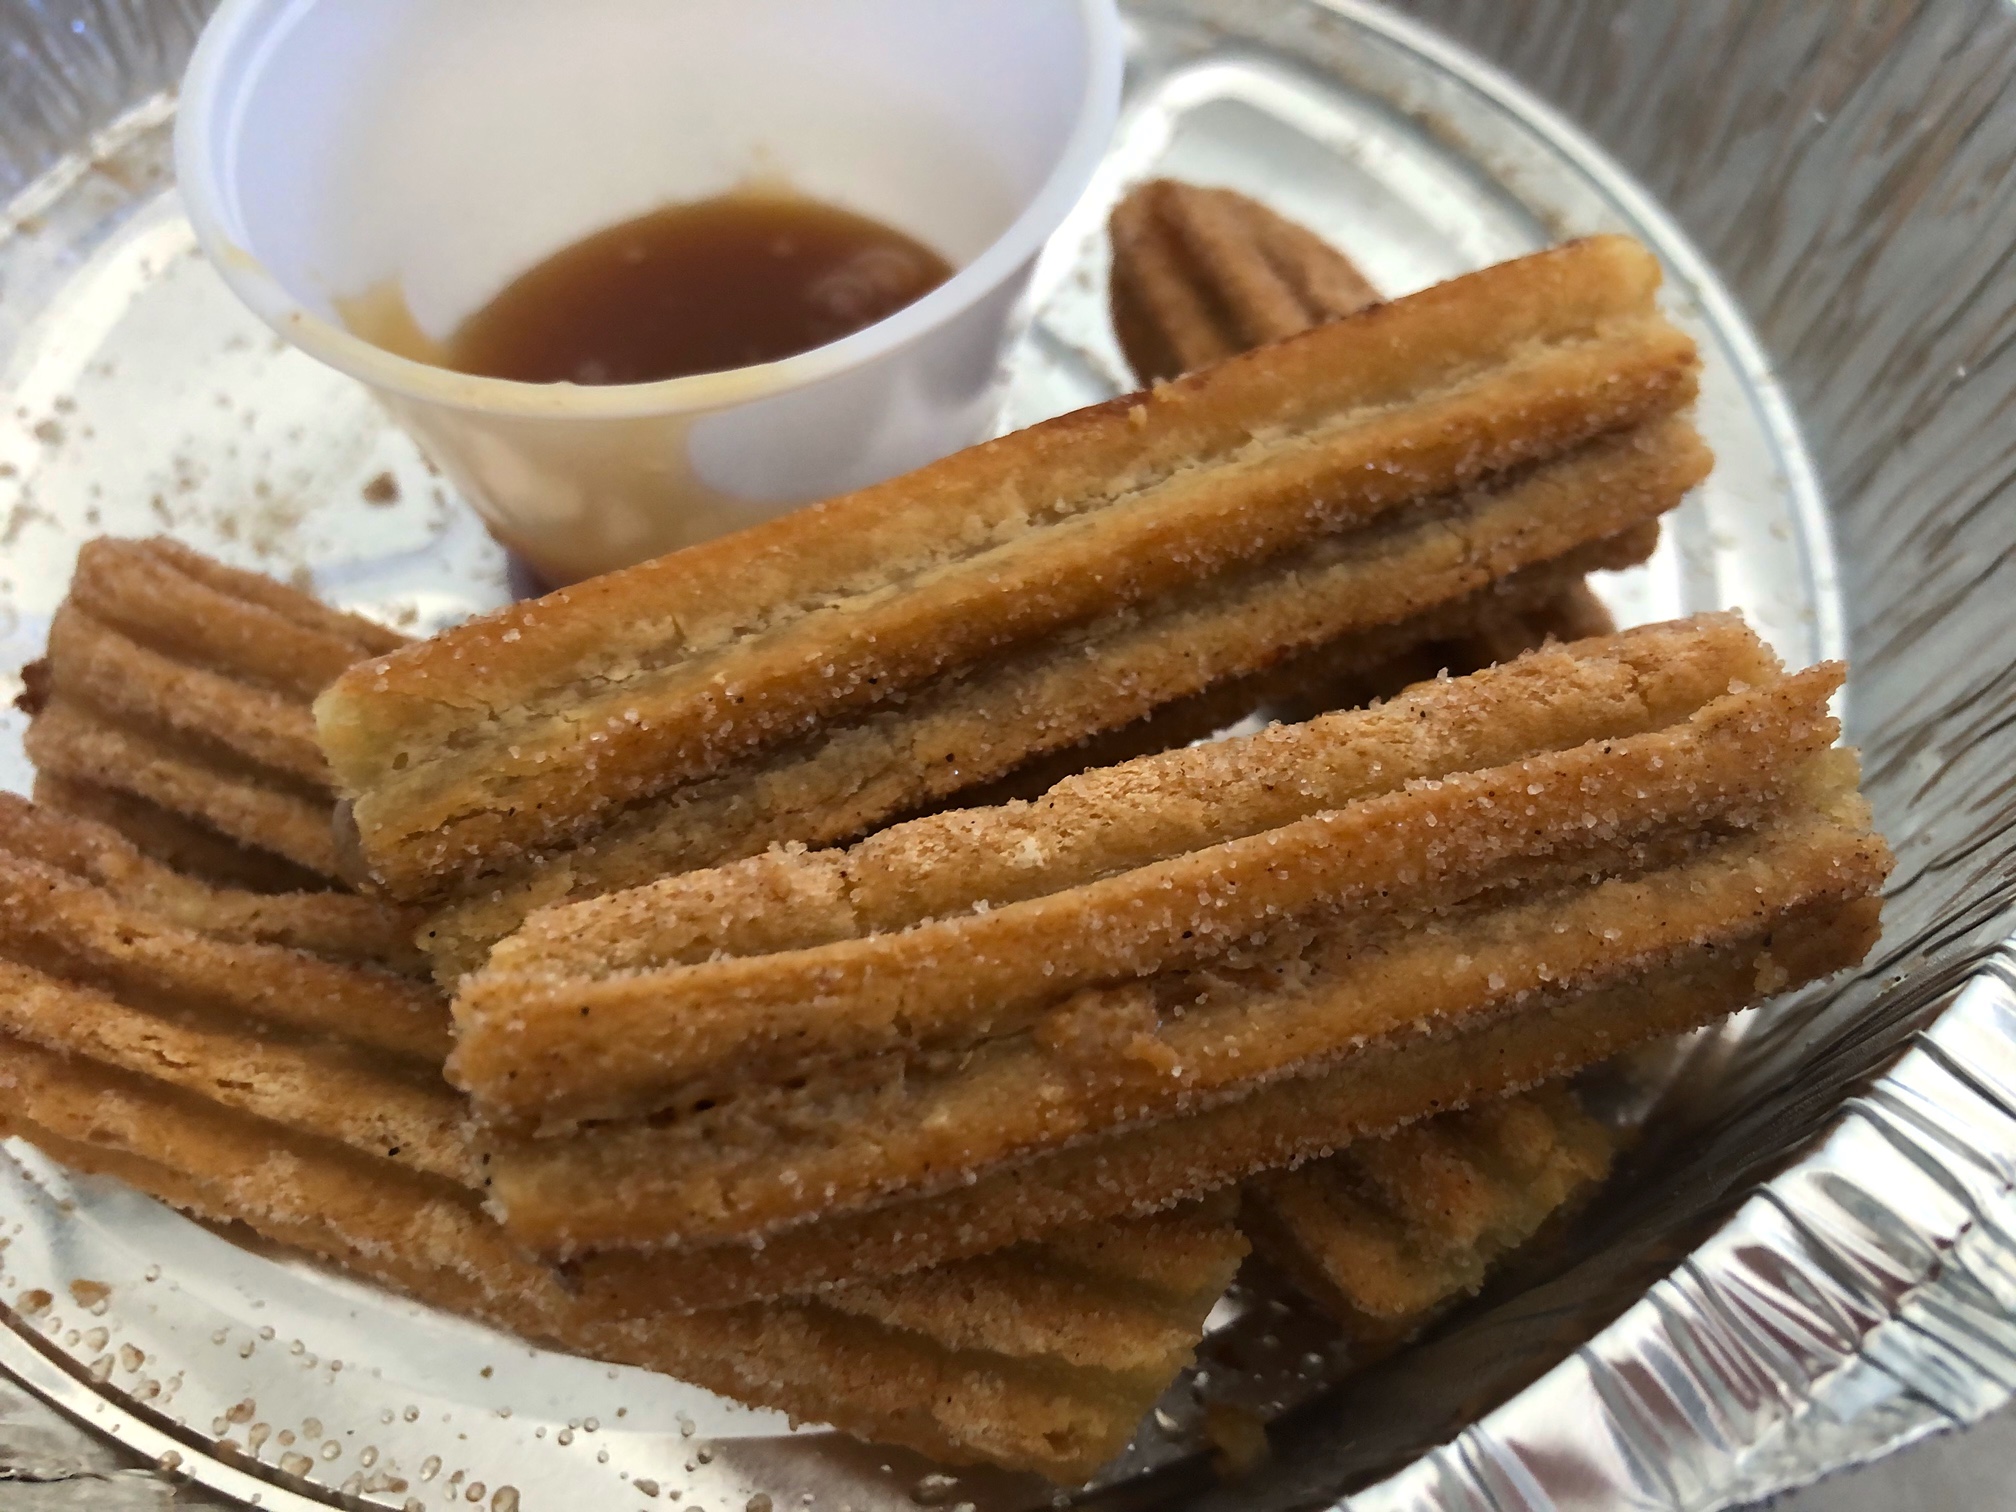 In a circular tin foil takeout container from El Toro II in Champaign, there are six miniature churros dusted in cinnamon sugar beside a small plastic cup with almost no caramel sauce in it. Photo by Alyssa Buckley.